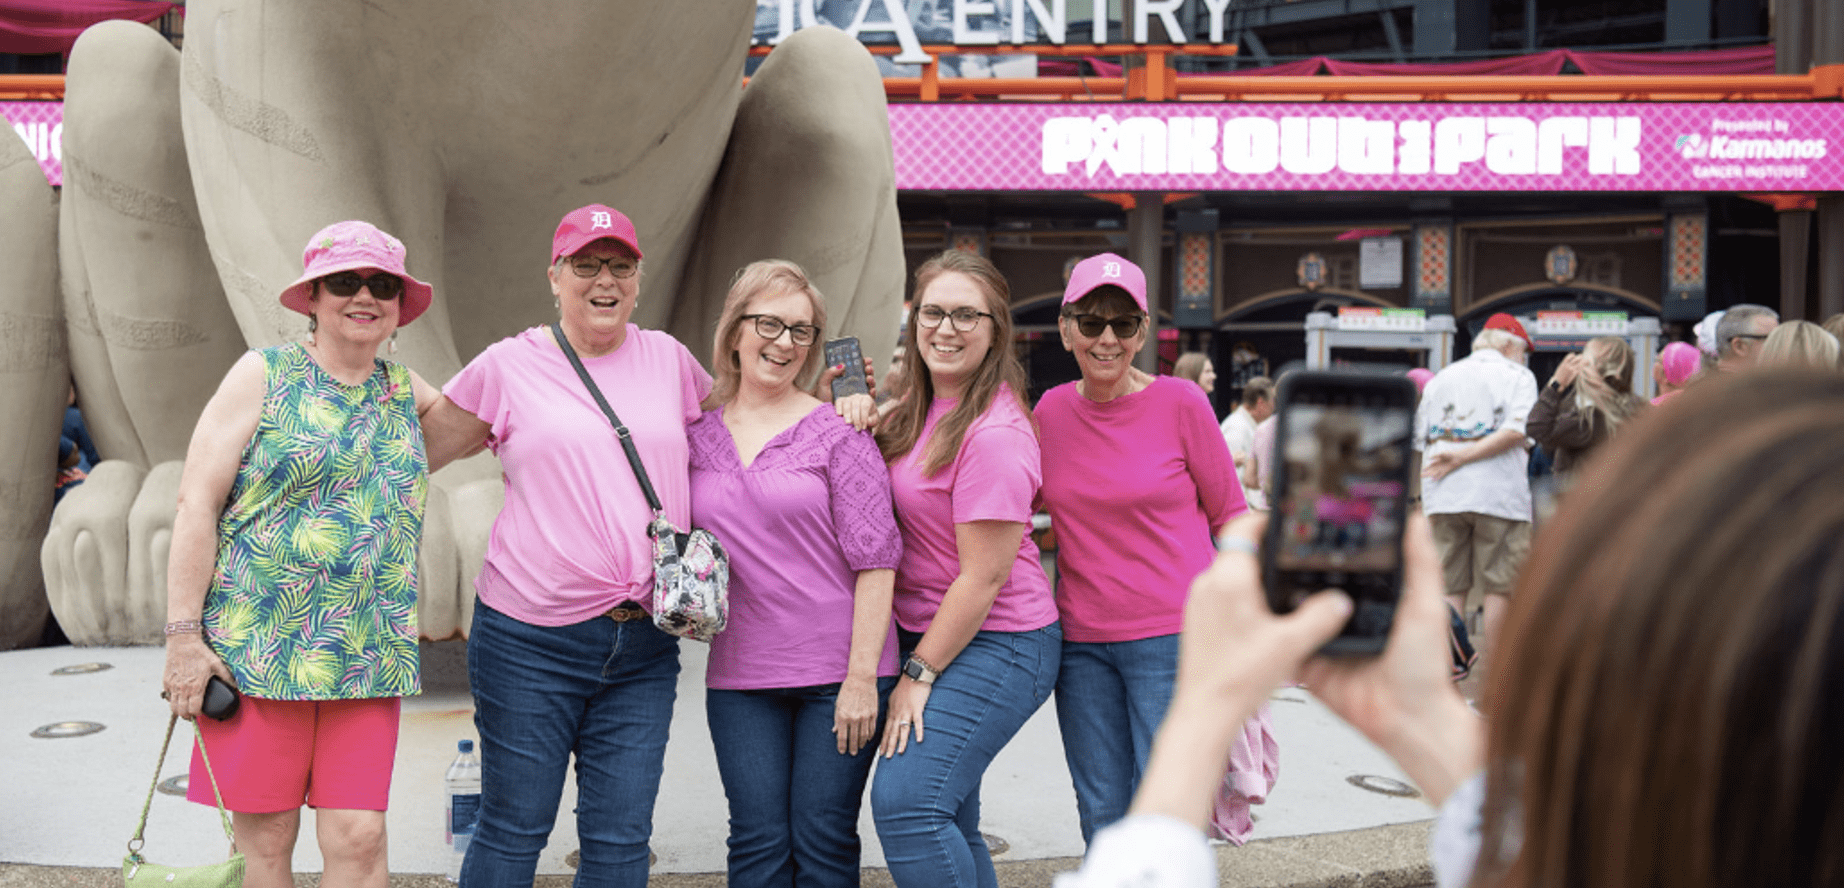 Detroit Tigers and Karmanos Cancer Institute Unite to Raise Breast